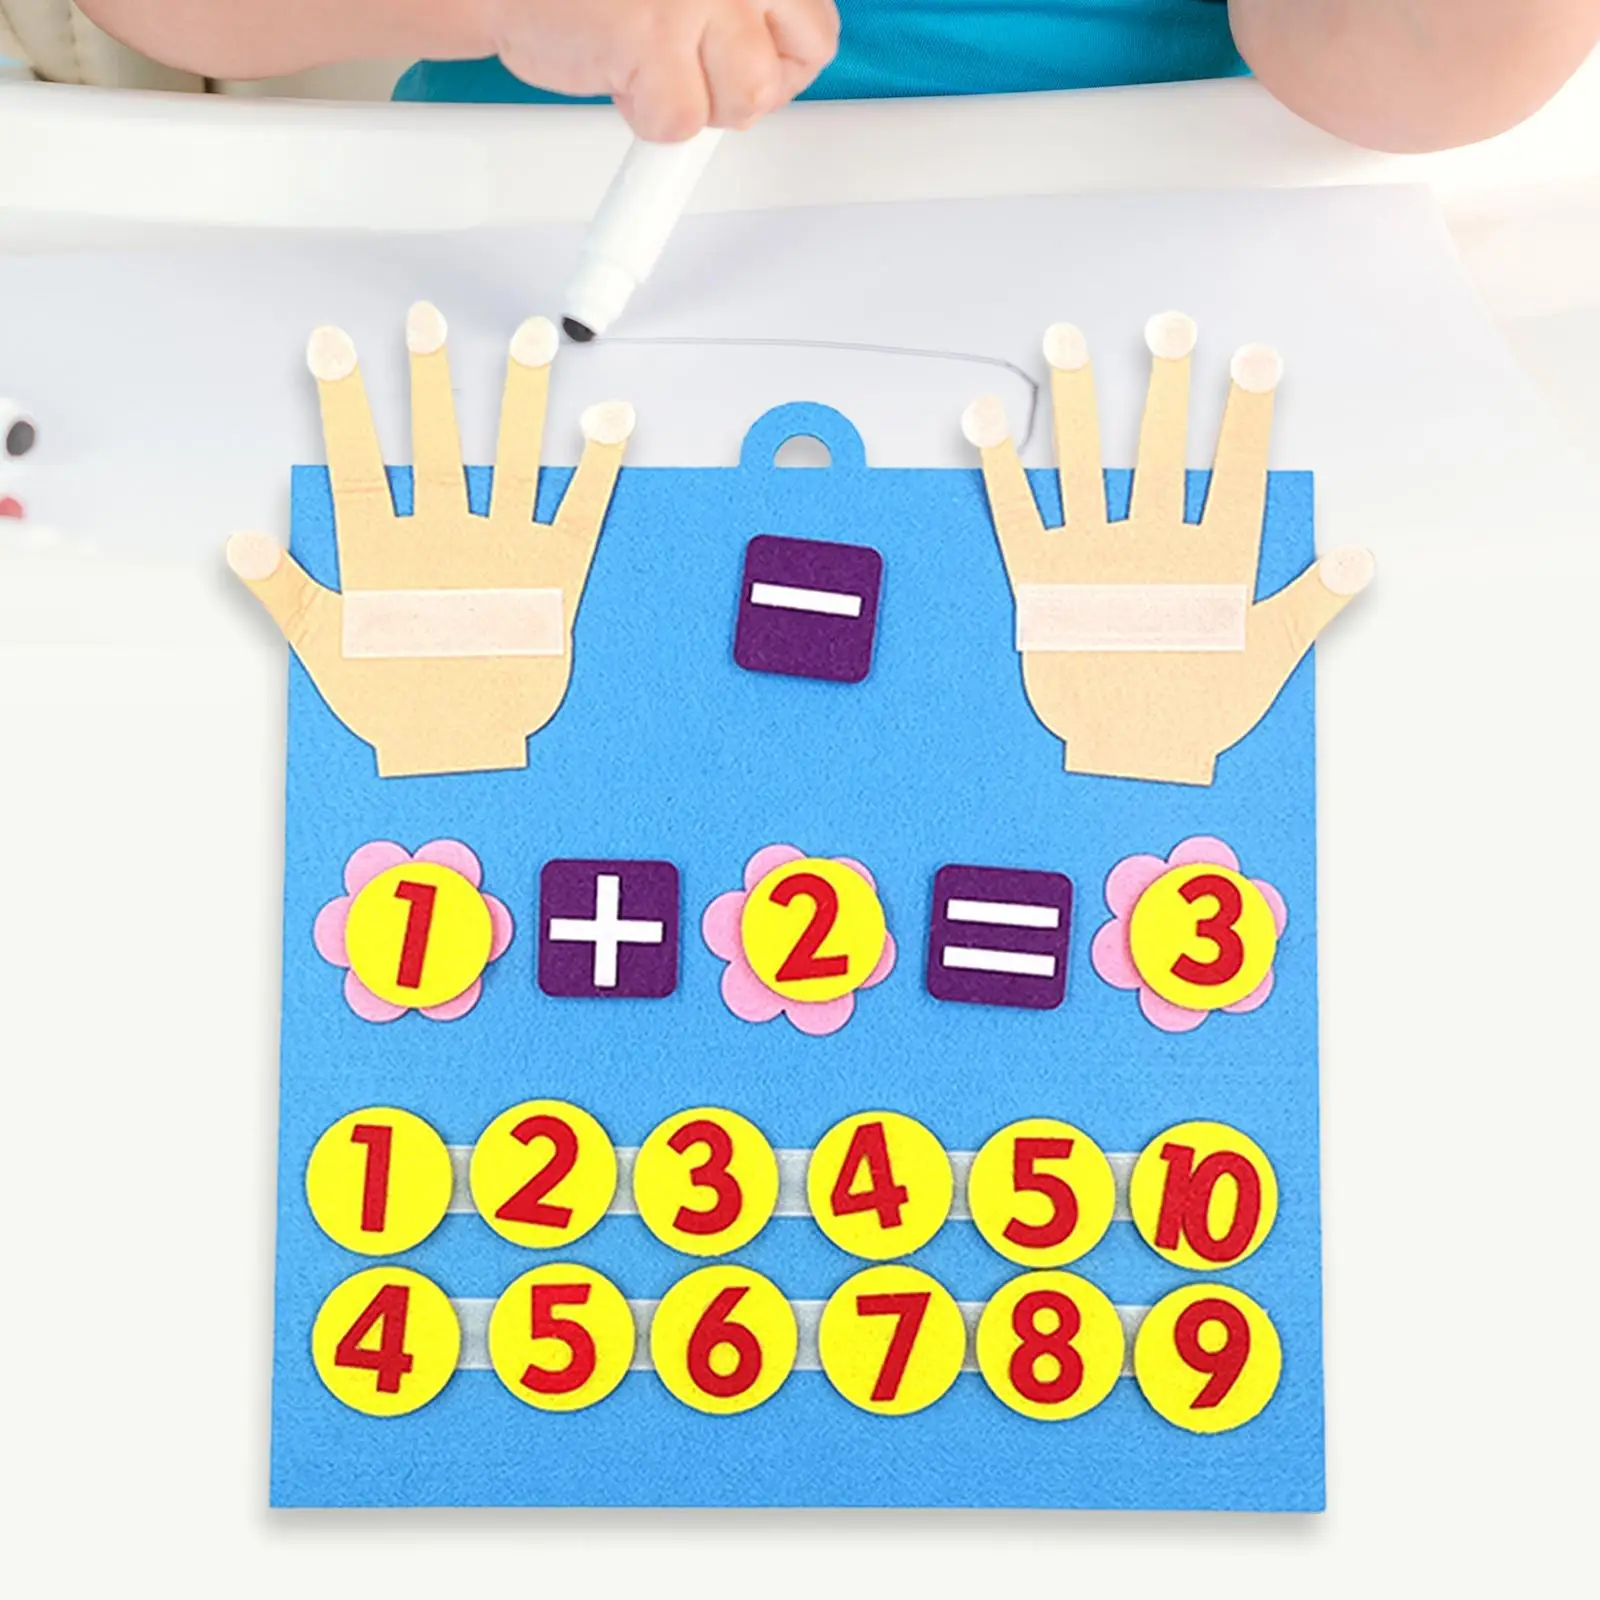 Felt Board Finger Numbers Counting Toy Early Education Toys Math Addition and Subtraction Teaching Aids for Baby Girls Boys Kids